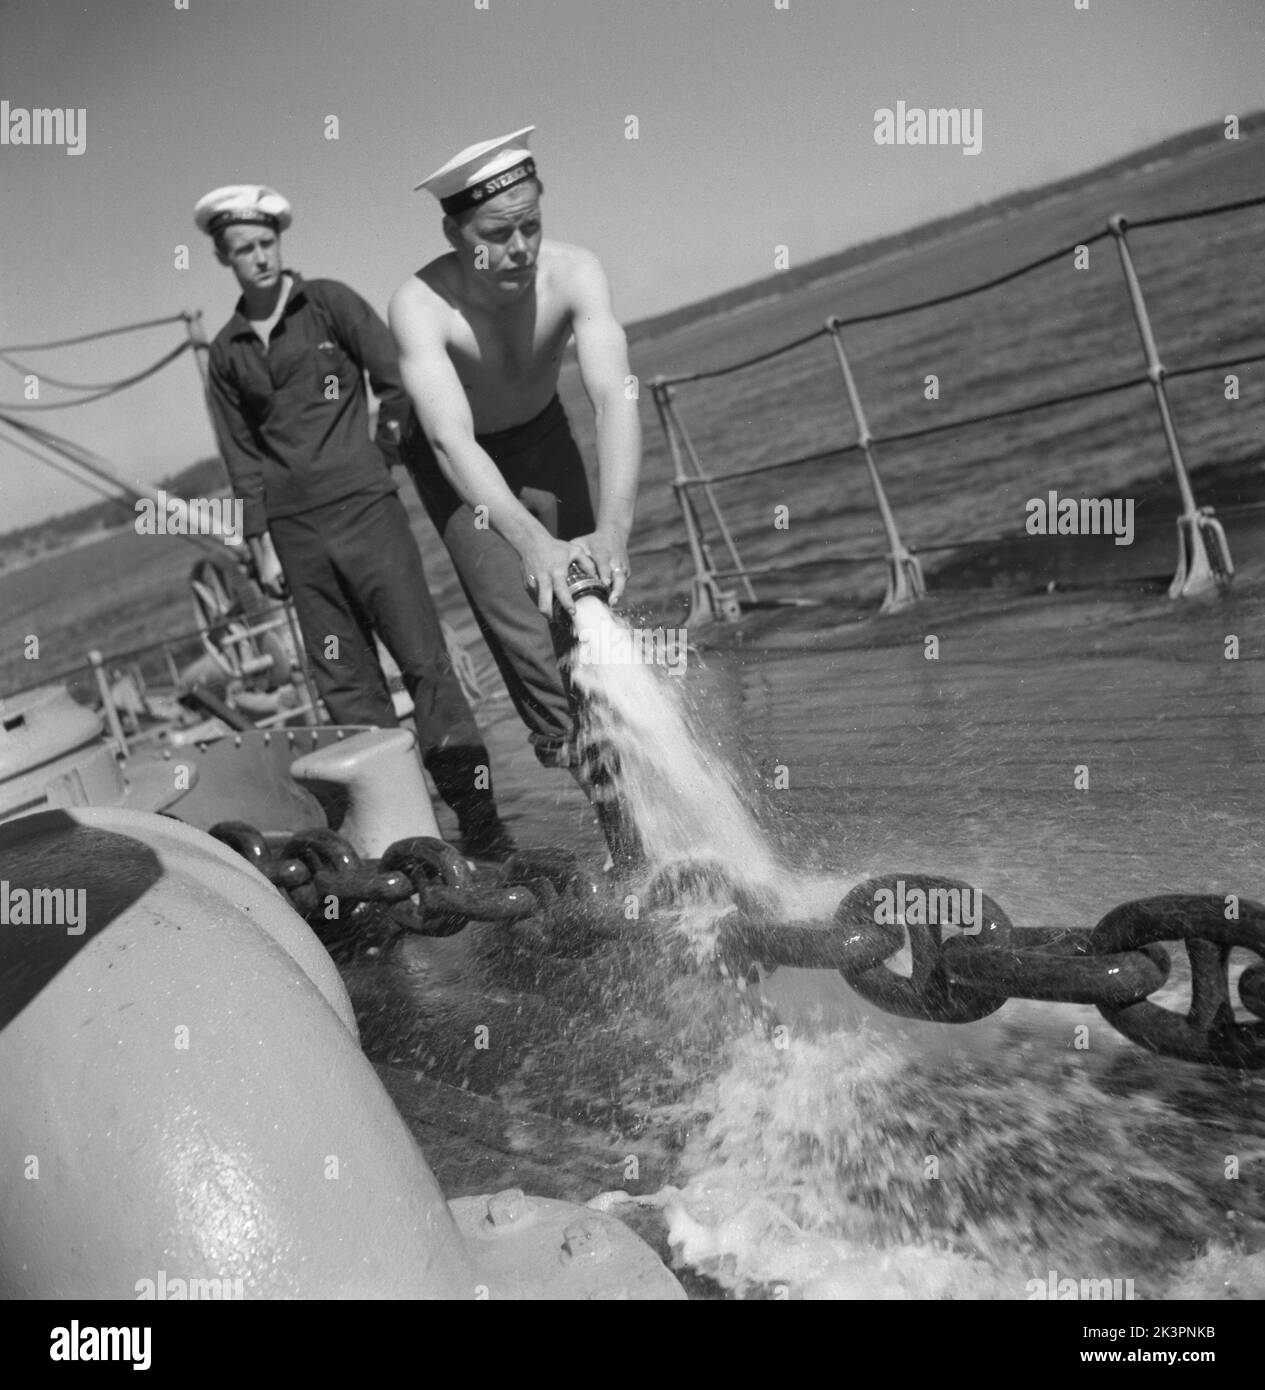 During World war II. The war ship Sverige during navy exercises at sea. The anchor chain is being pulled up and a sailor is hosing it with water to remove clay and mud from it.  Sweden june 1940. Kristoffersson ref 141 Stock Photo